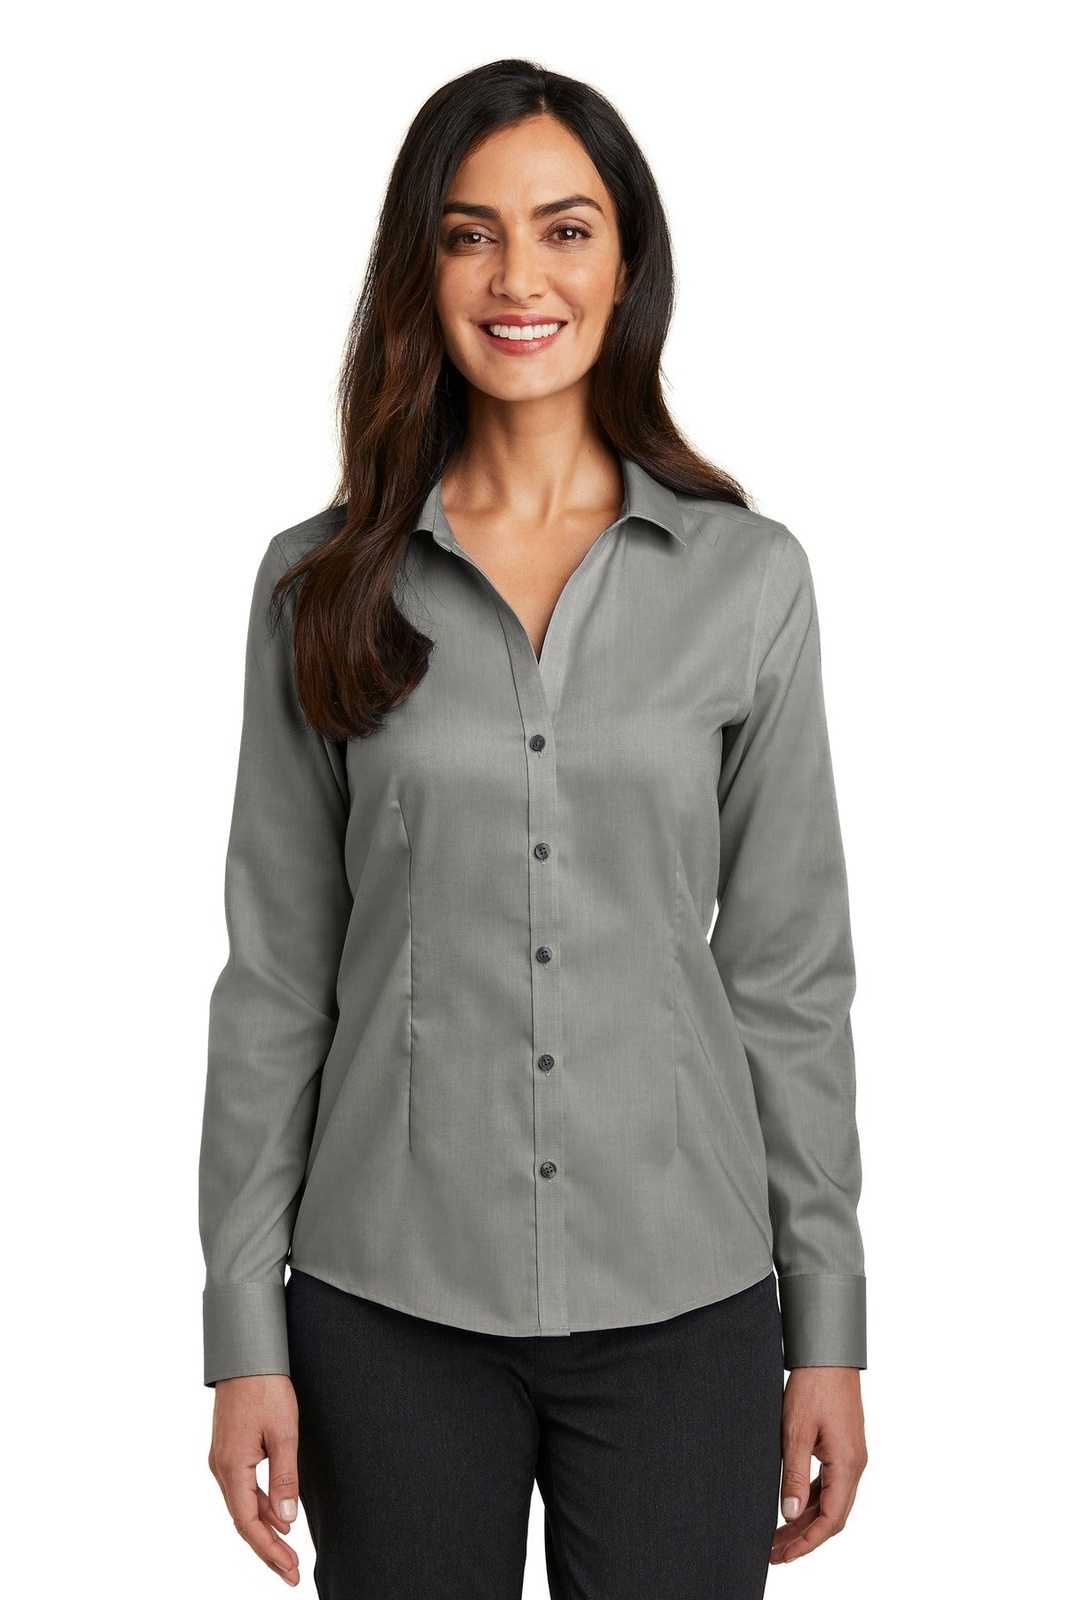 Red House RH250 Ladies Pinpoint Oxford Non-Iron Shirt - Charcoal - HIT a Double - 1